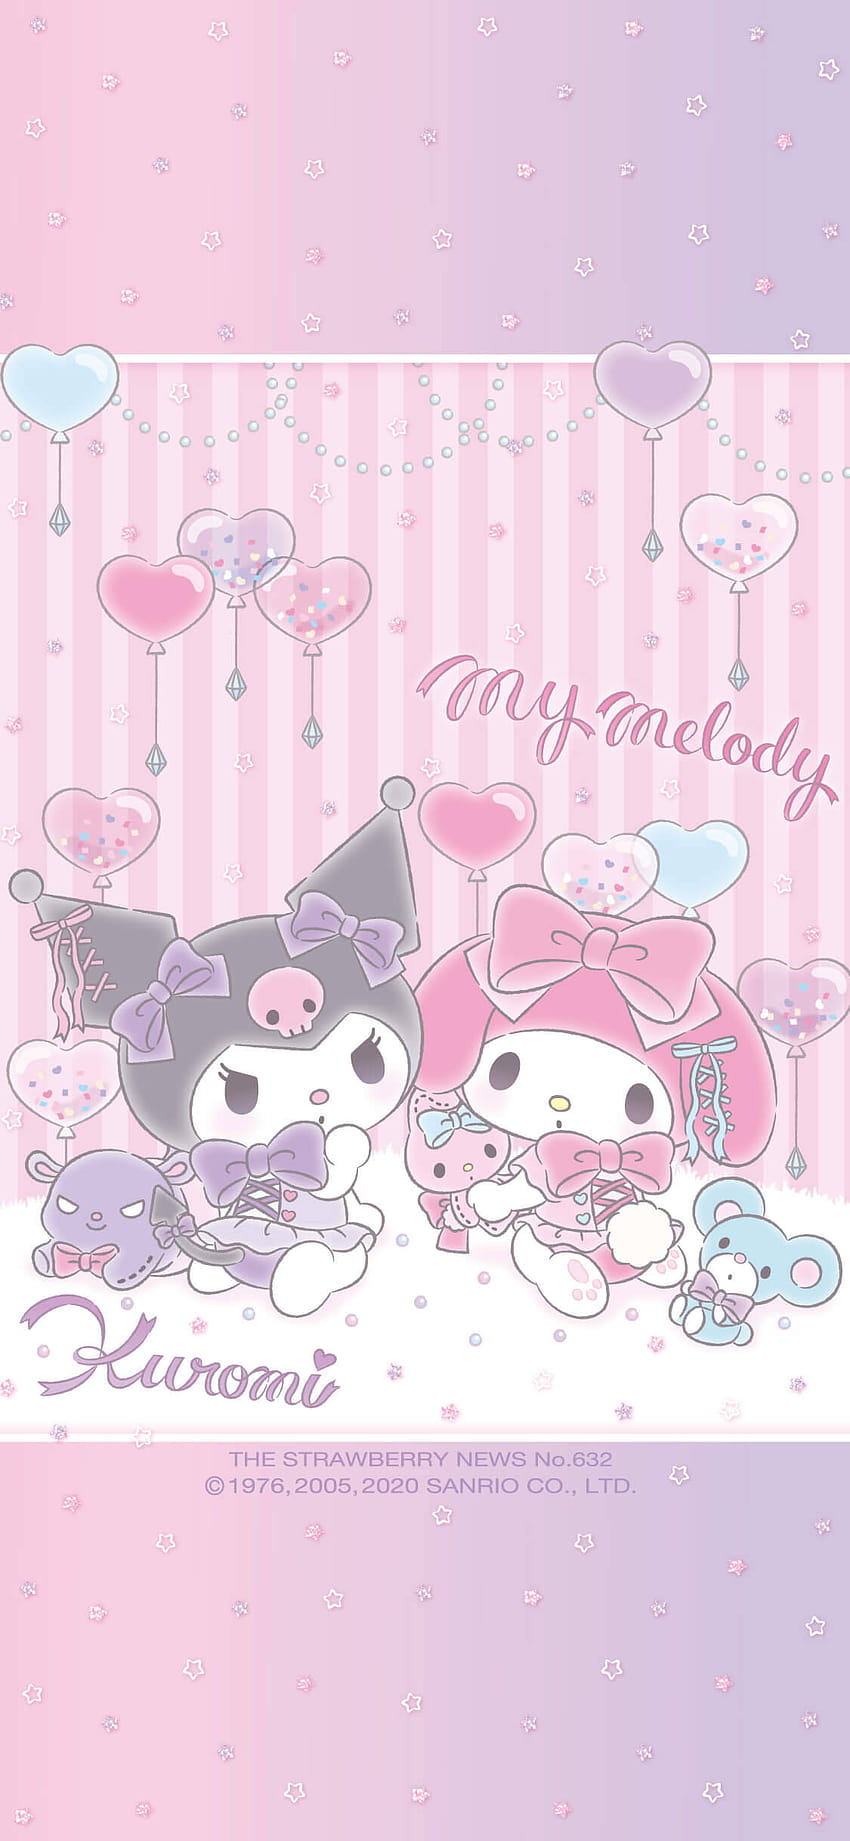 ♡ Be Positive ♡, kuromi and melody HD phone wallpaper